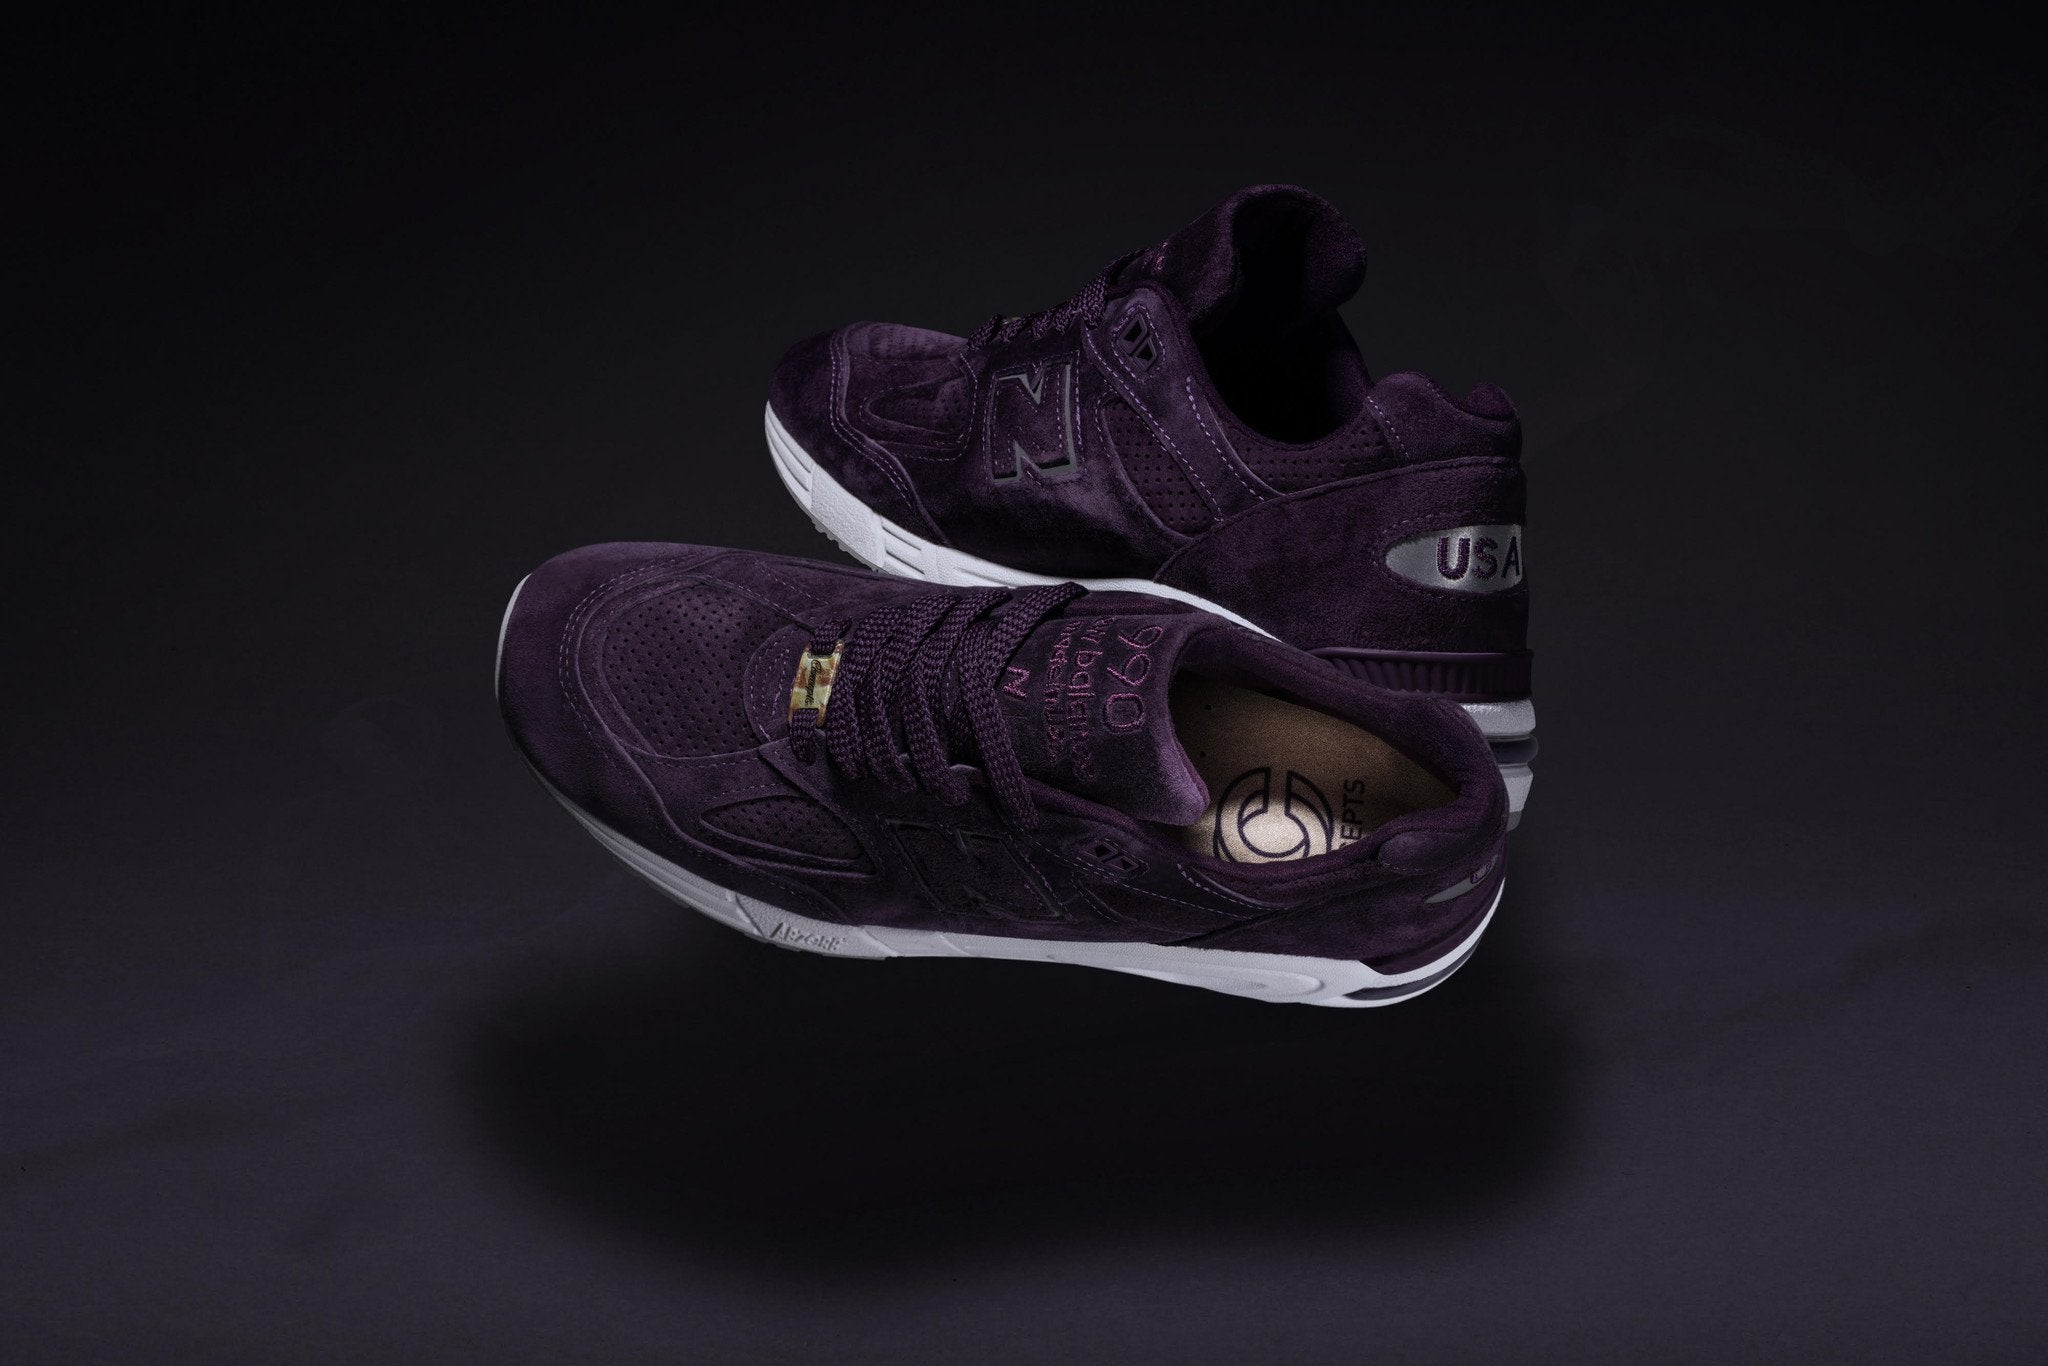 Concepts x New Balance 990 “Tyrian” Sneakers / SWAGGER Magazine